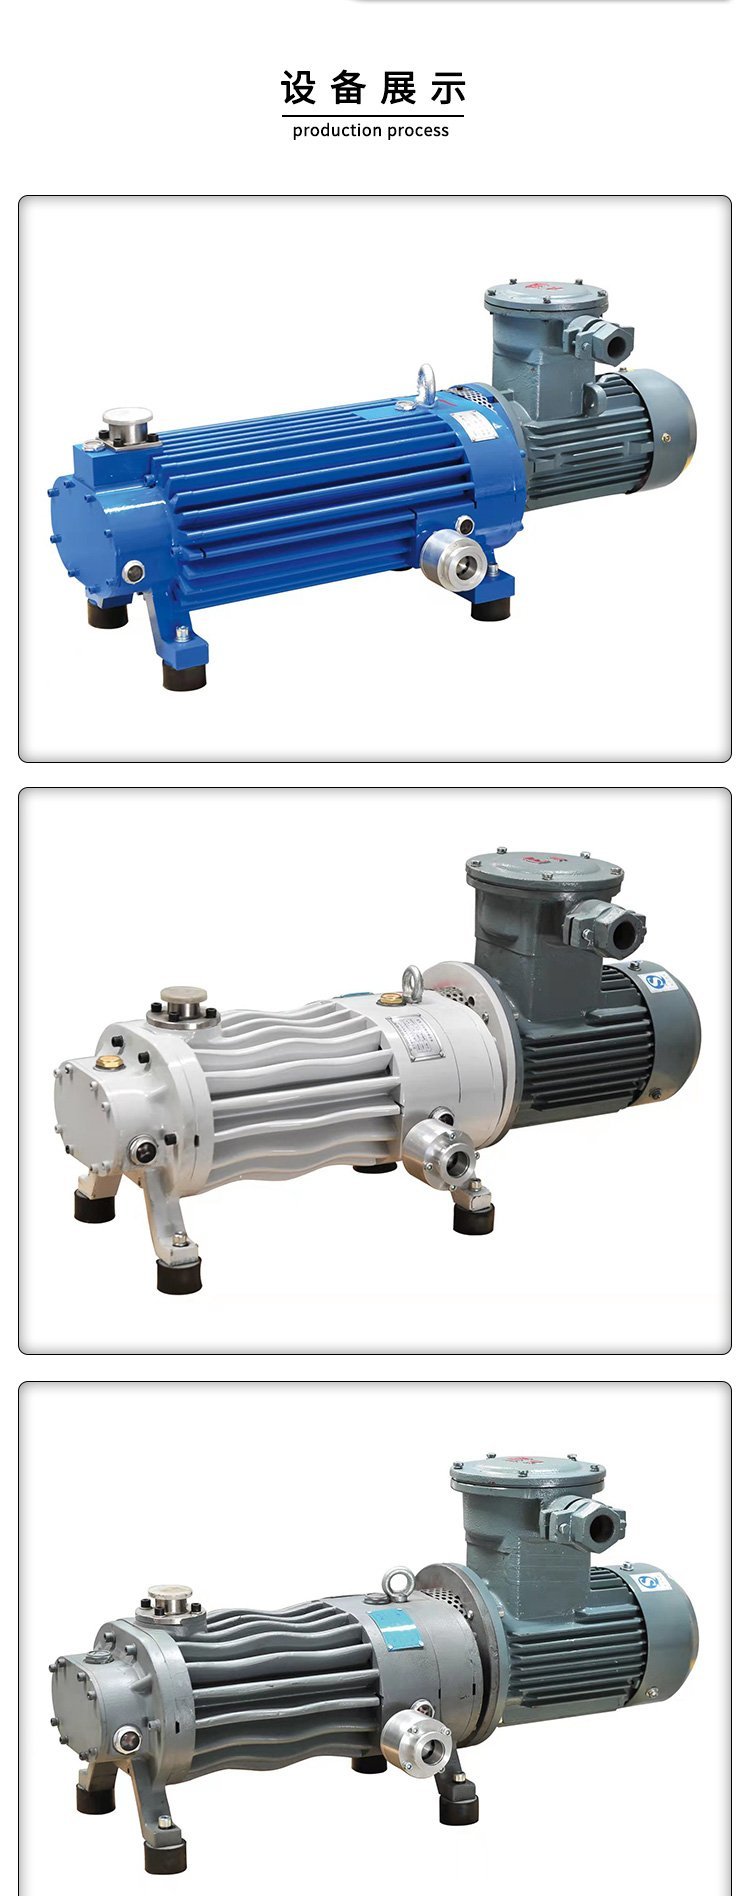 Kane air-cooled dry screw vacuum pump Screw pump is energy-saving and pollution-free, with high vacuum degree